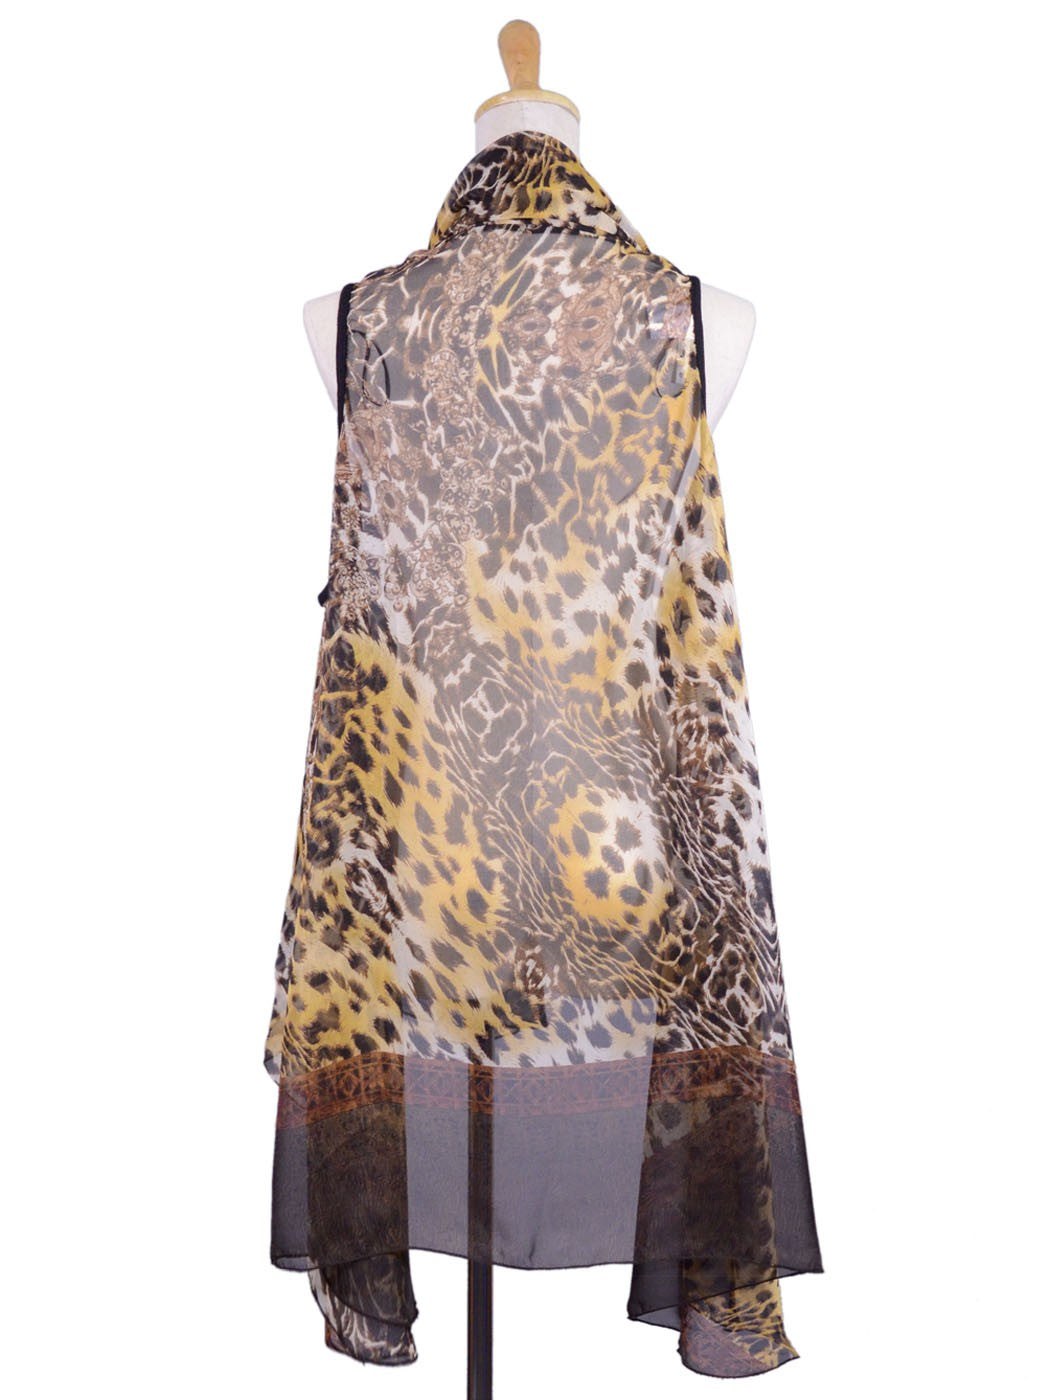 Trendology Girly Glam Cheetah Print Easy Dual Layering Cover Up Poncho